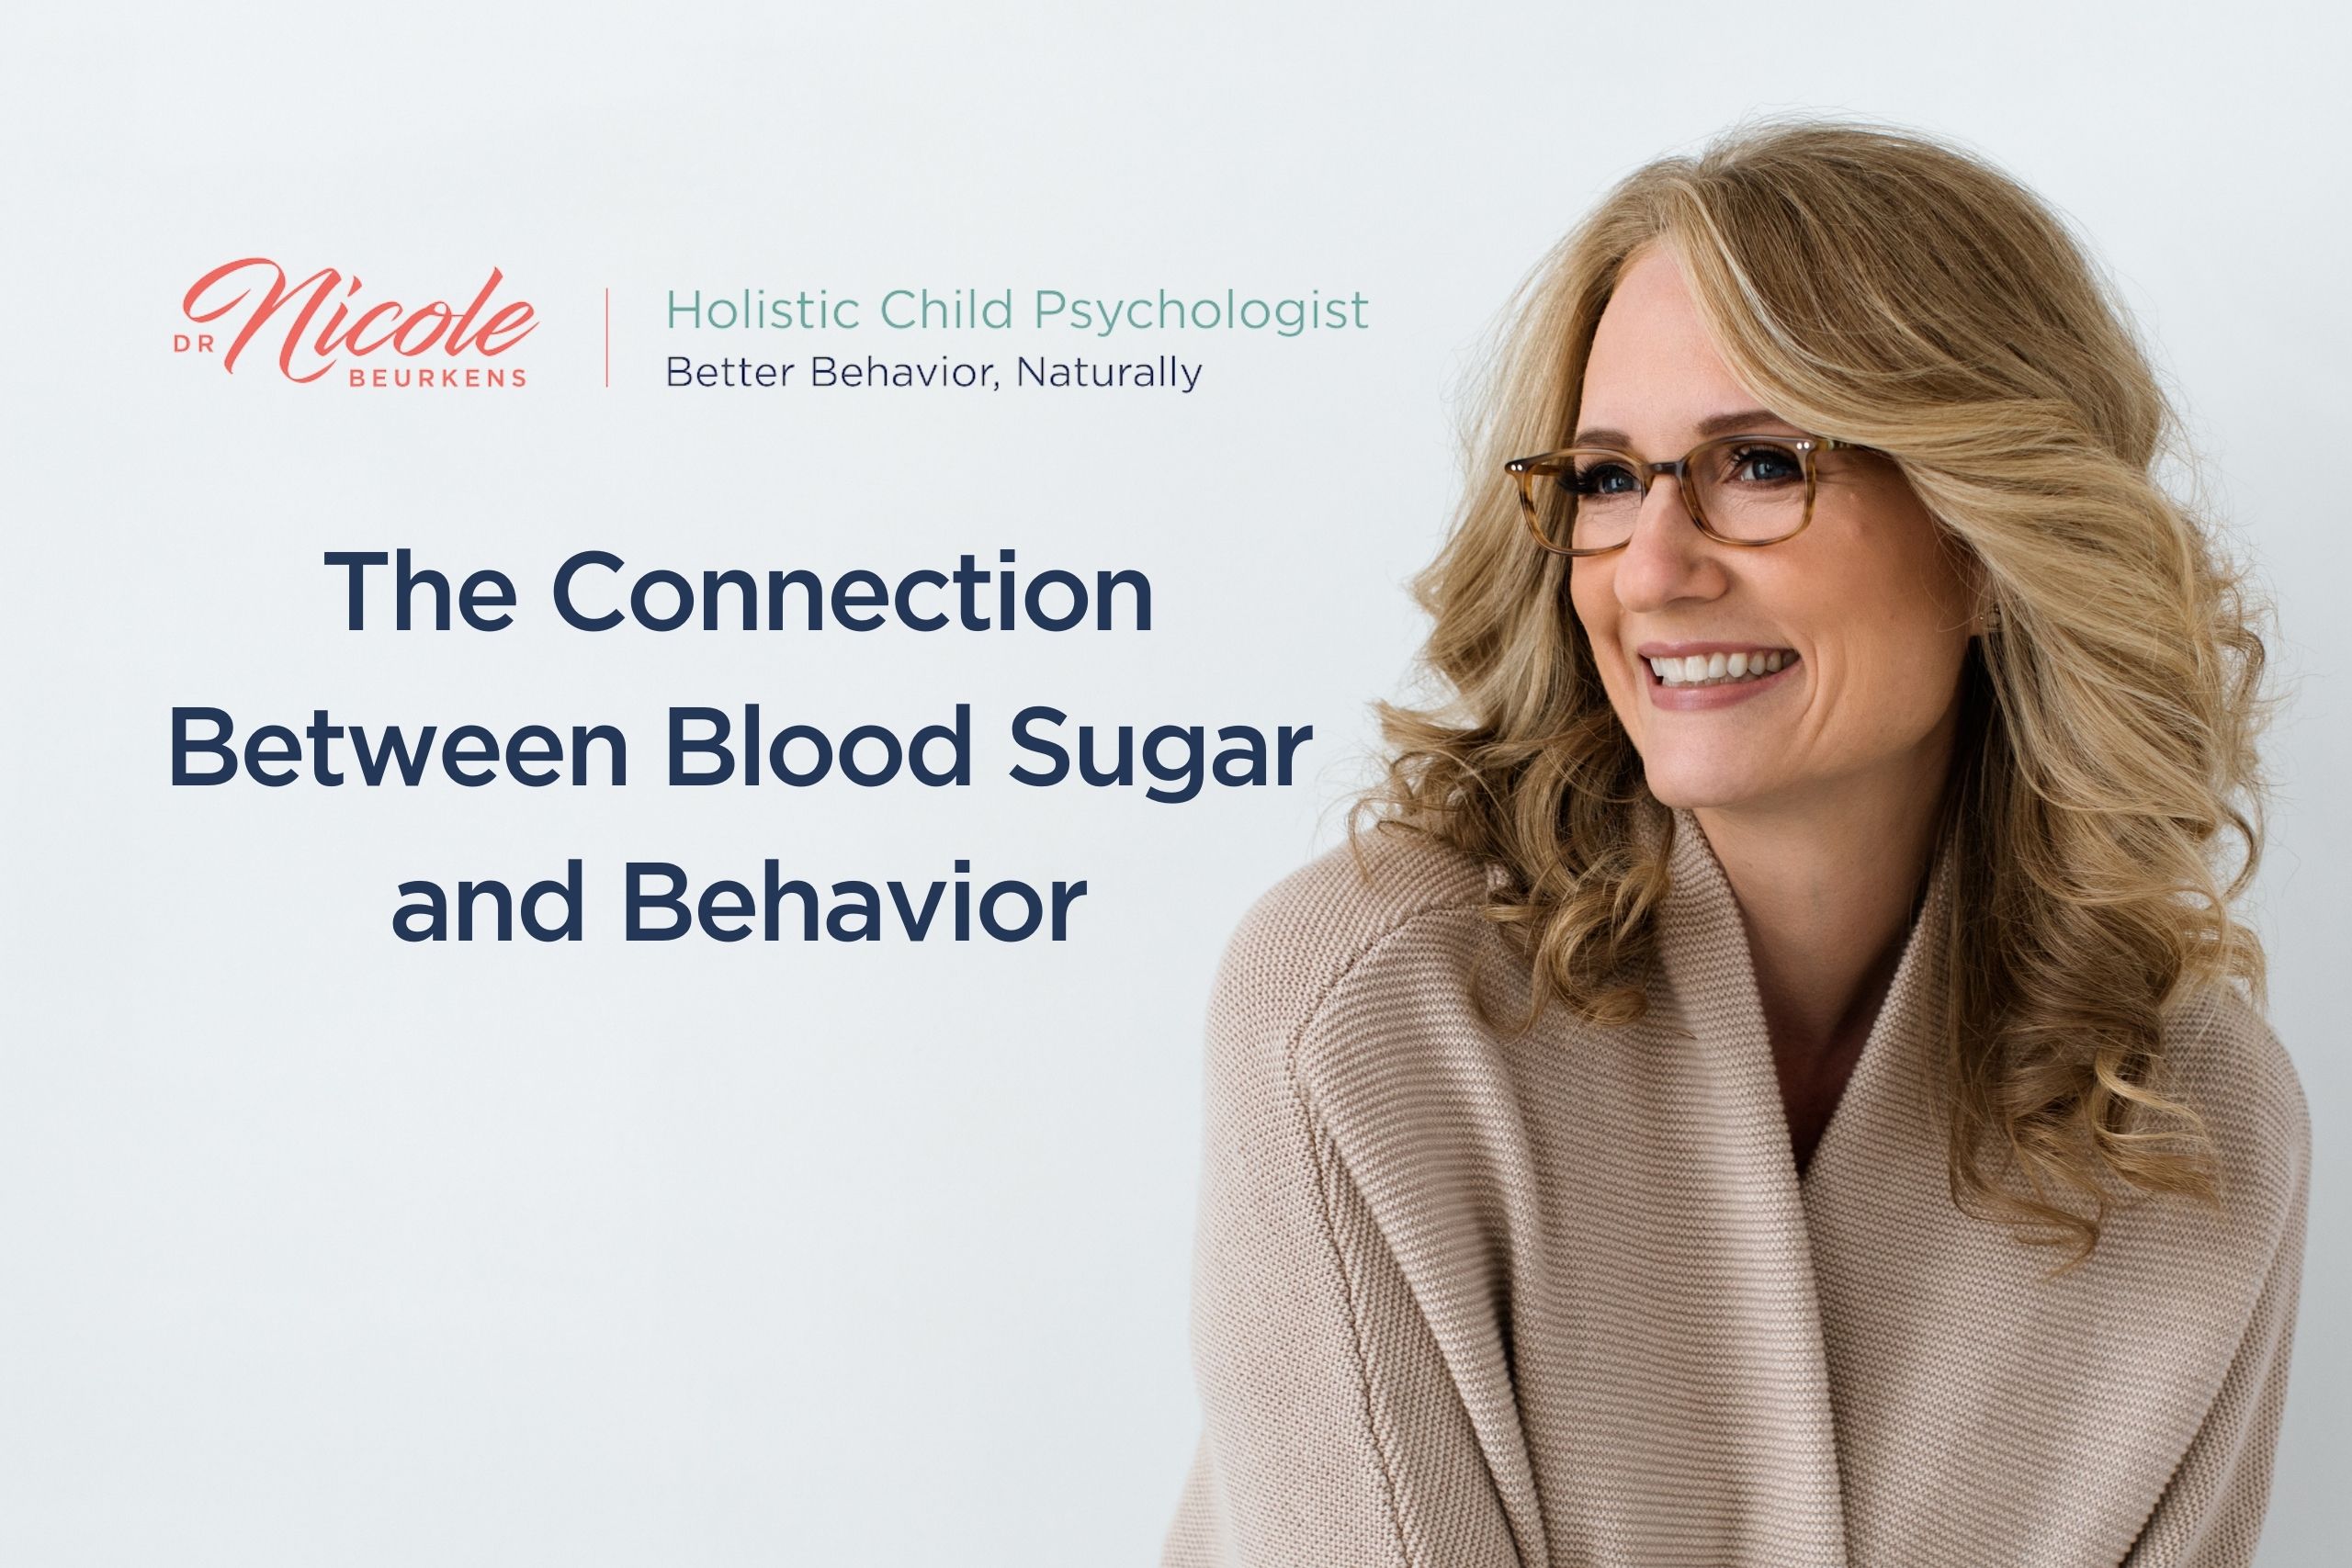 The connection between blood sugar and behavior in children